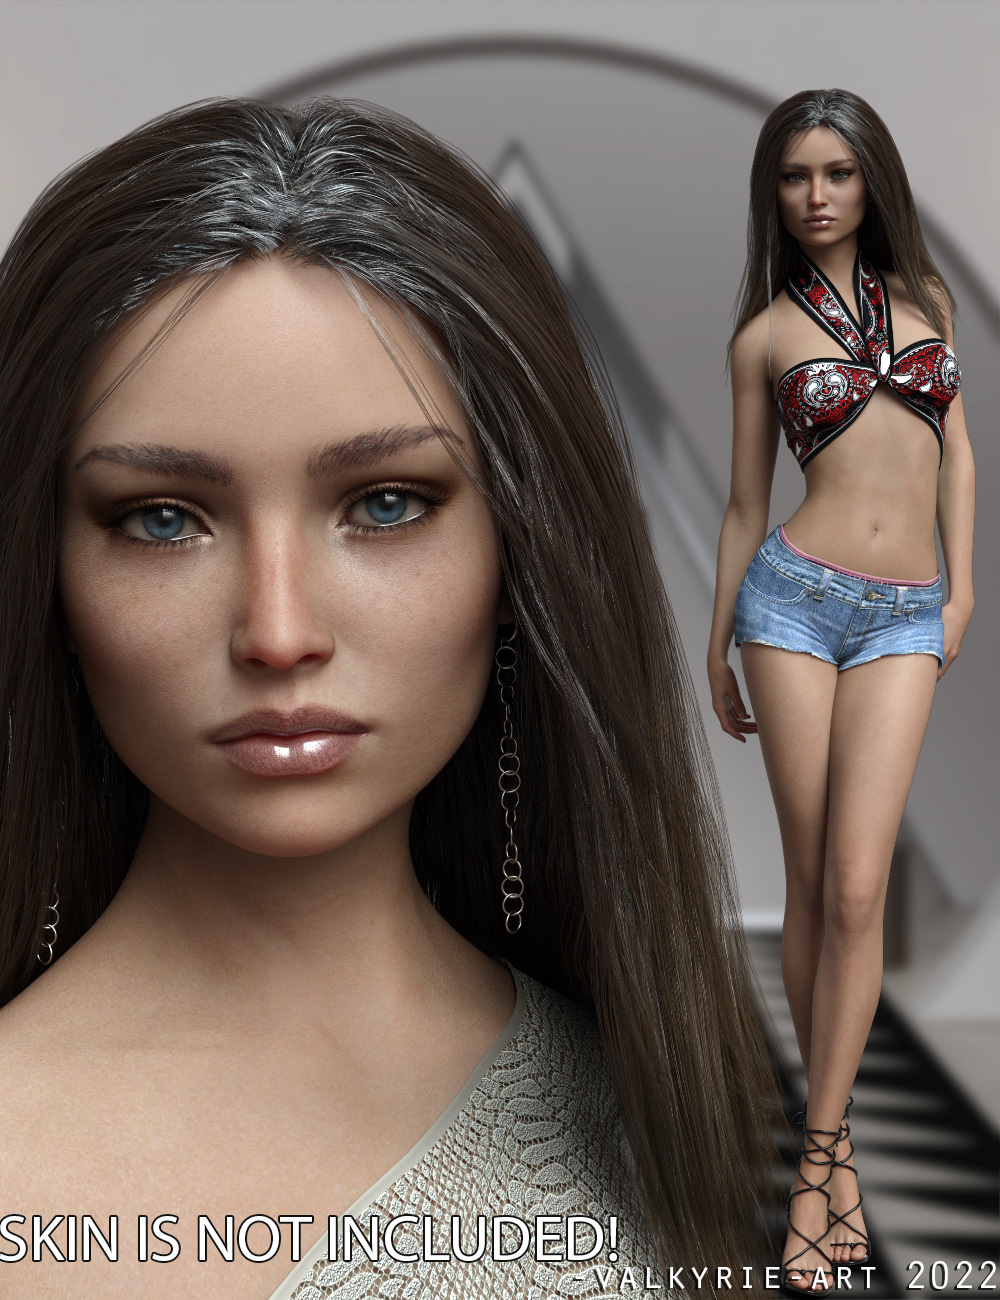 nStyle Girls - Head and Body Morphs for G8F and G8.1F Vol 2